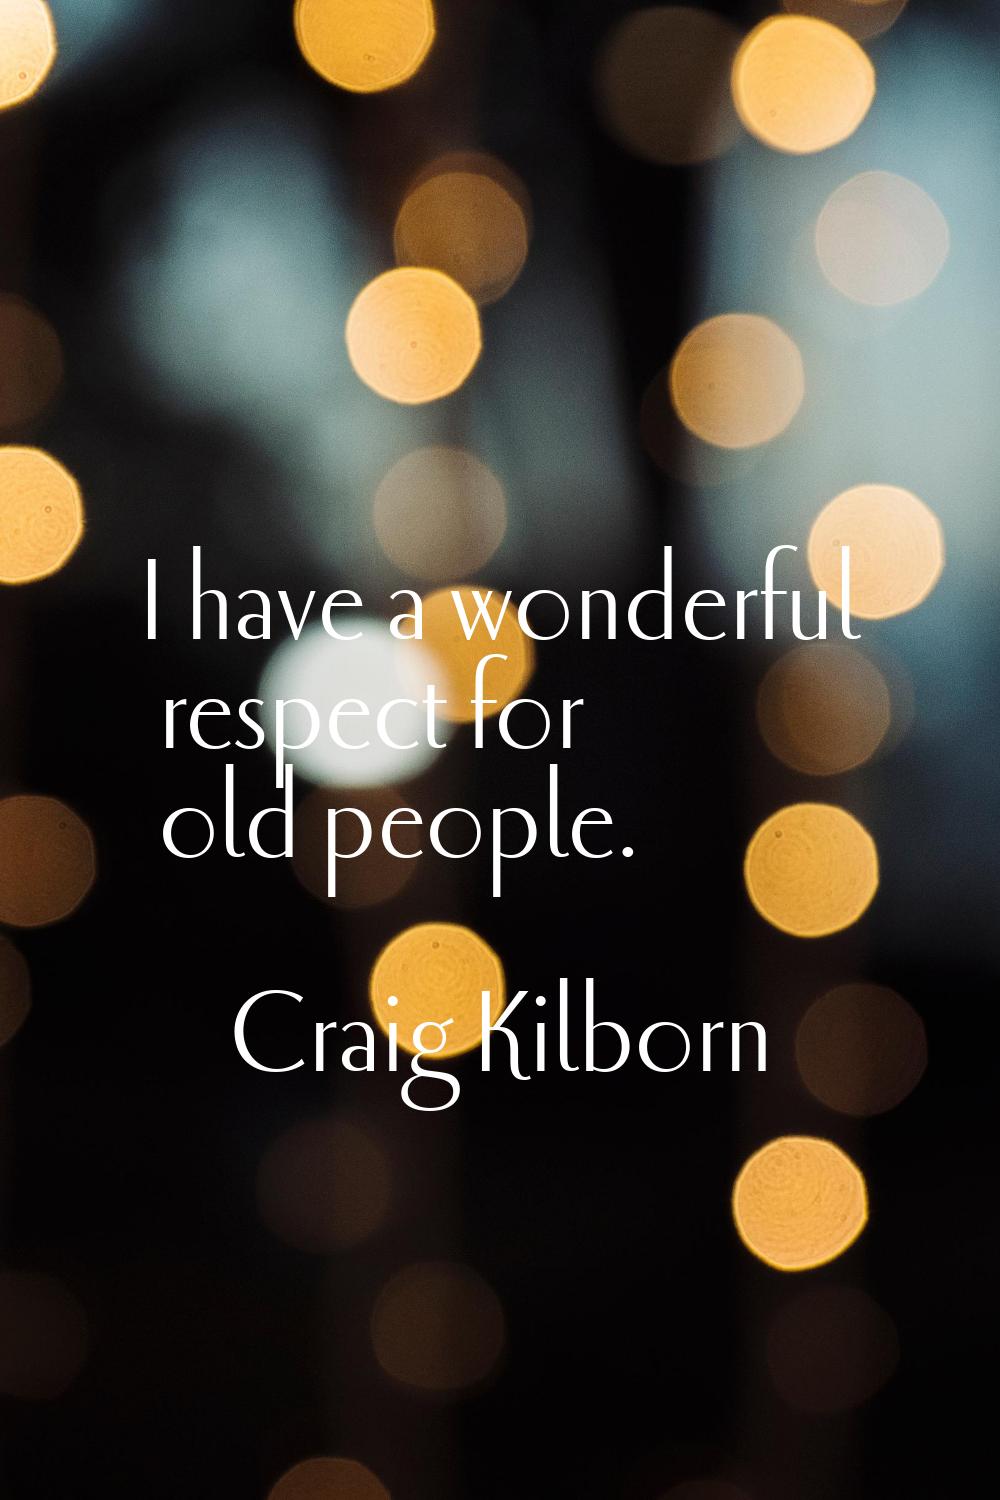 I have a wonderful respect for old people.